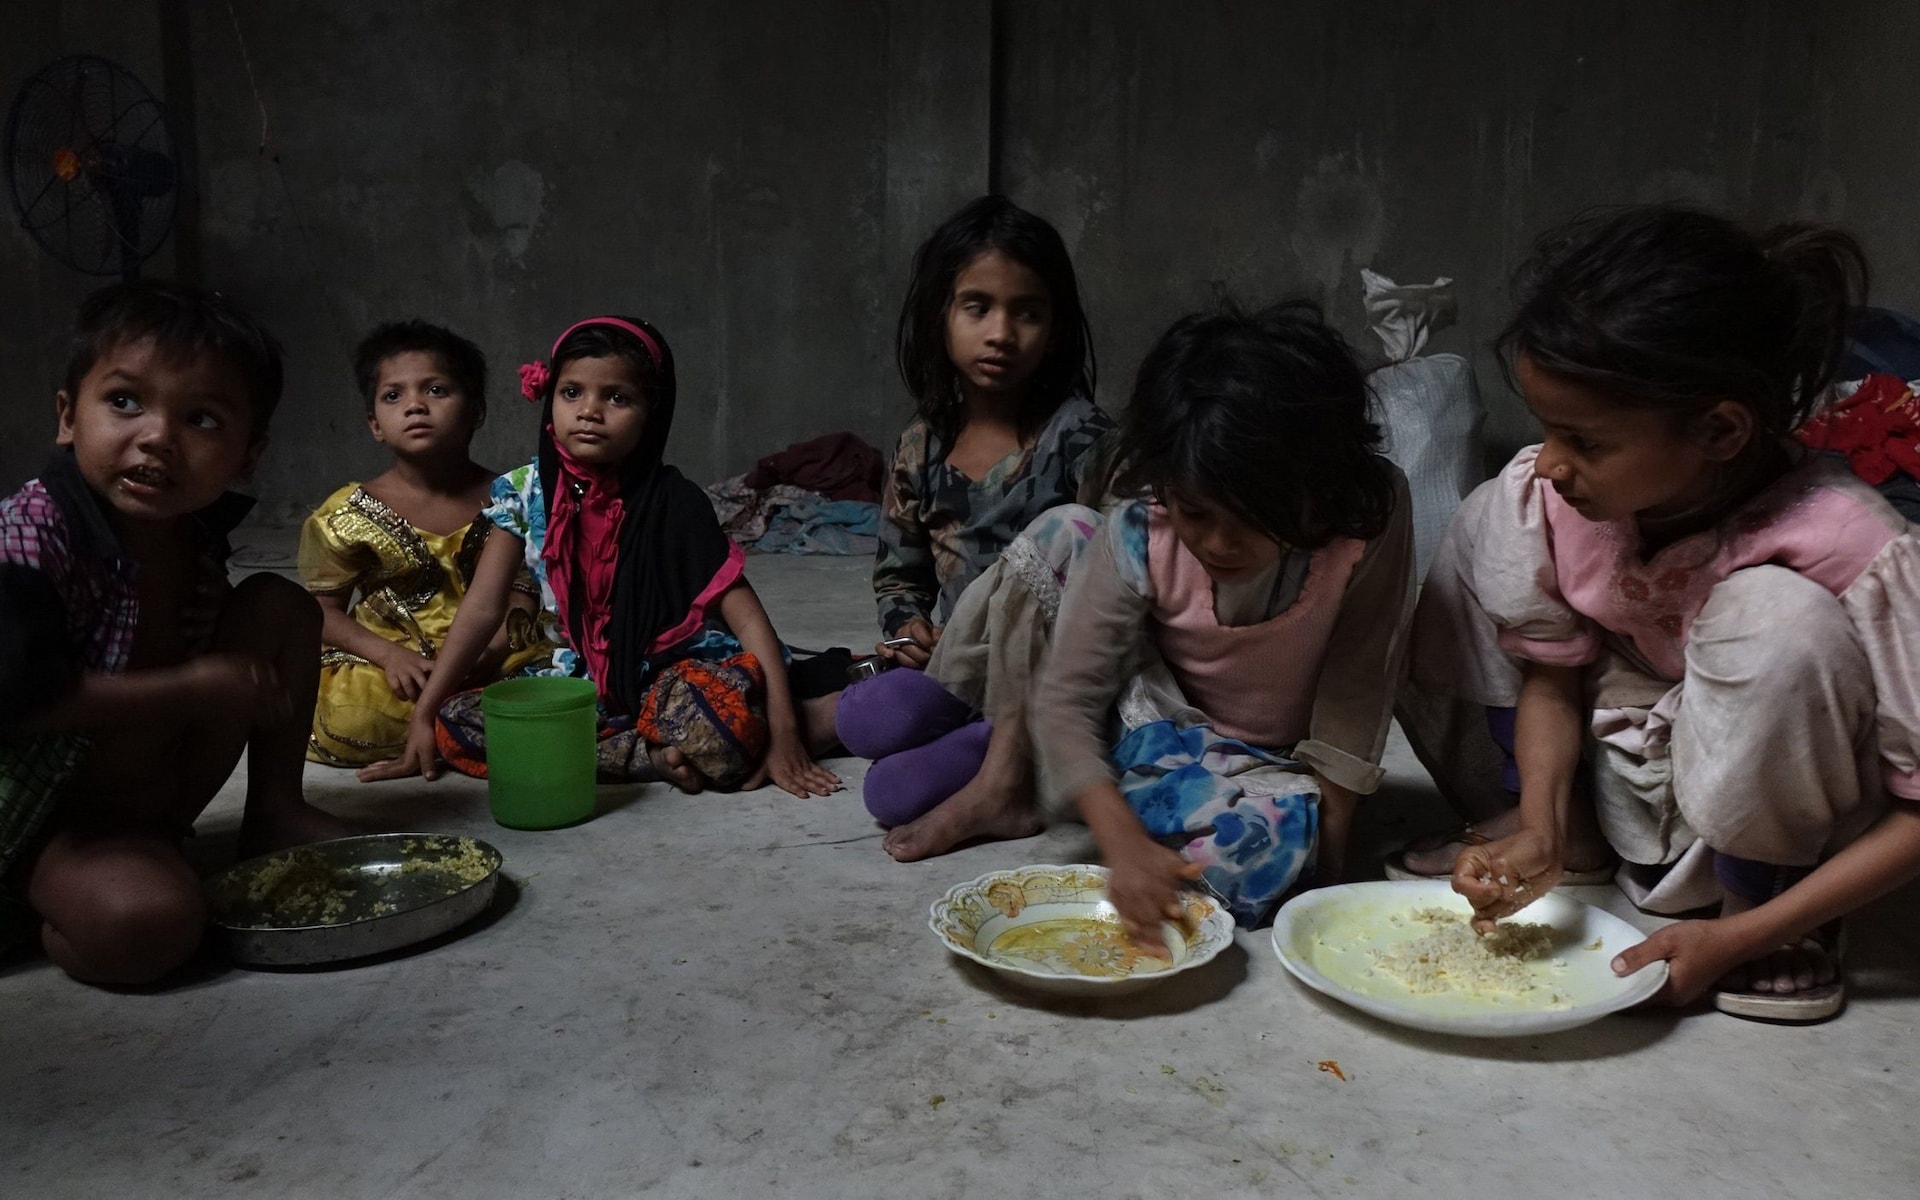 Some Rohingya children are taking their meals inside a makeshift Rohingya refugee camp at an unidentified location in eastern Indian state of West Bengal. Most Rohingya refugees work as rag-pickers in India and live in marginalised society. CREDIT: SHAIKH AZIZUR RAHMAN